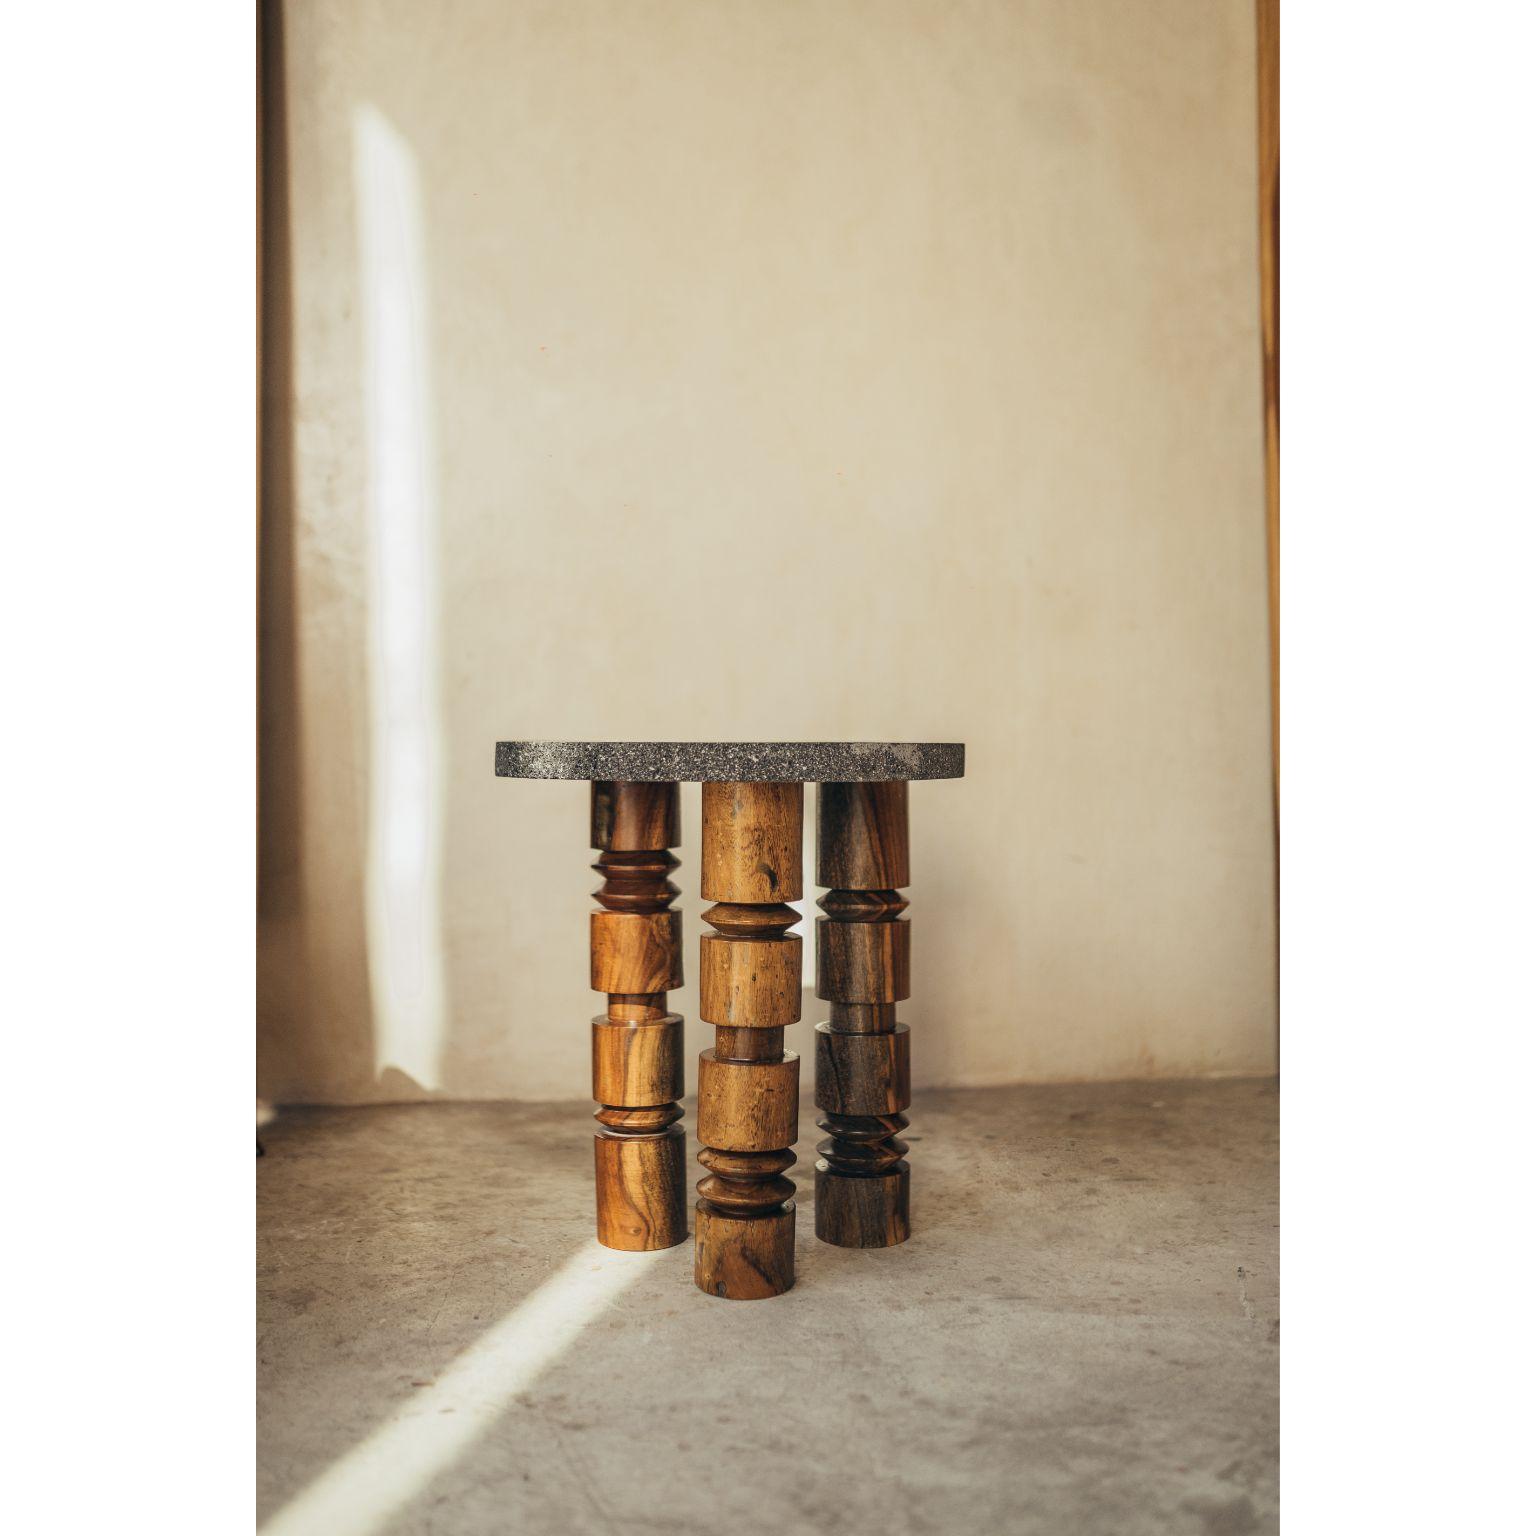 Volcanic stone table with turned wooden legs by Daniel Orozco
Dimensions: D 50 x H 45 cm
Materials: Wood, Volcanic Stone

Daniel Orozco Estudio
We are an inclusive interior design estudio, who love to work with fabrics and natural textiles in